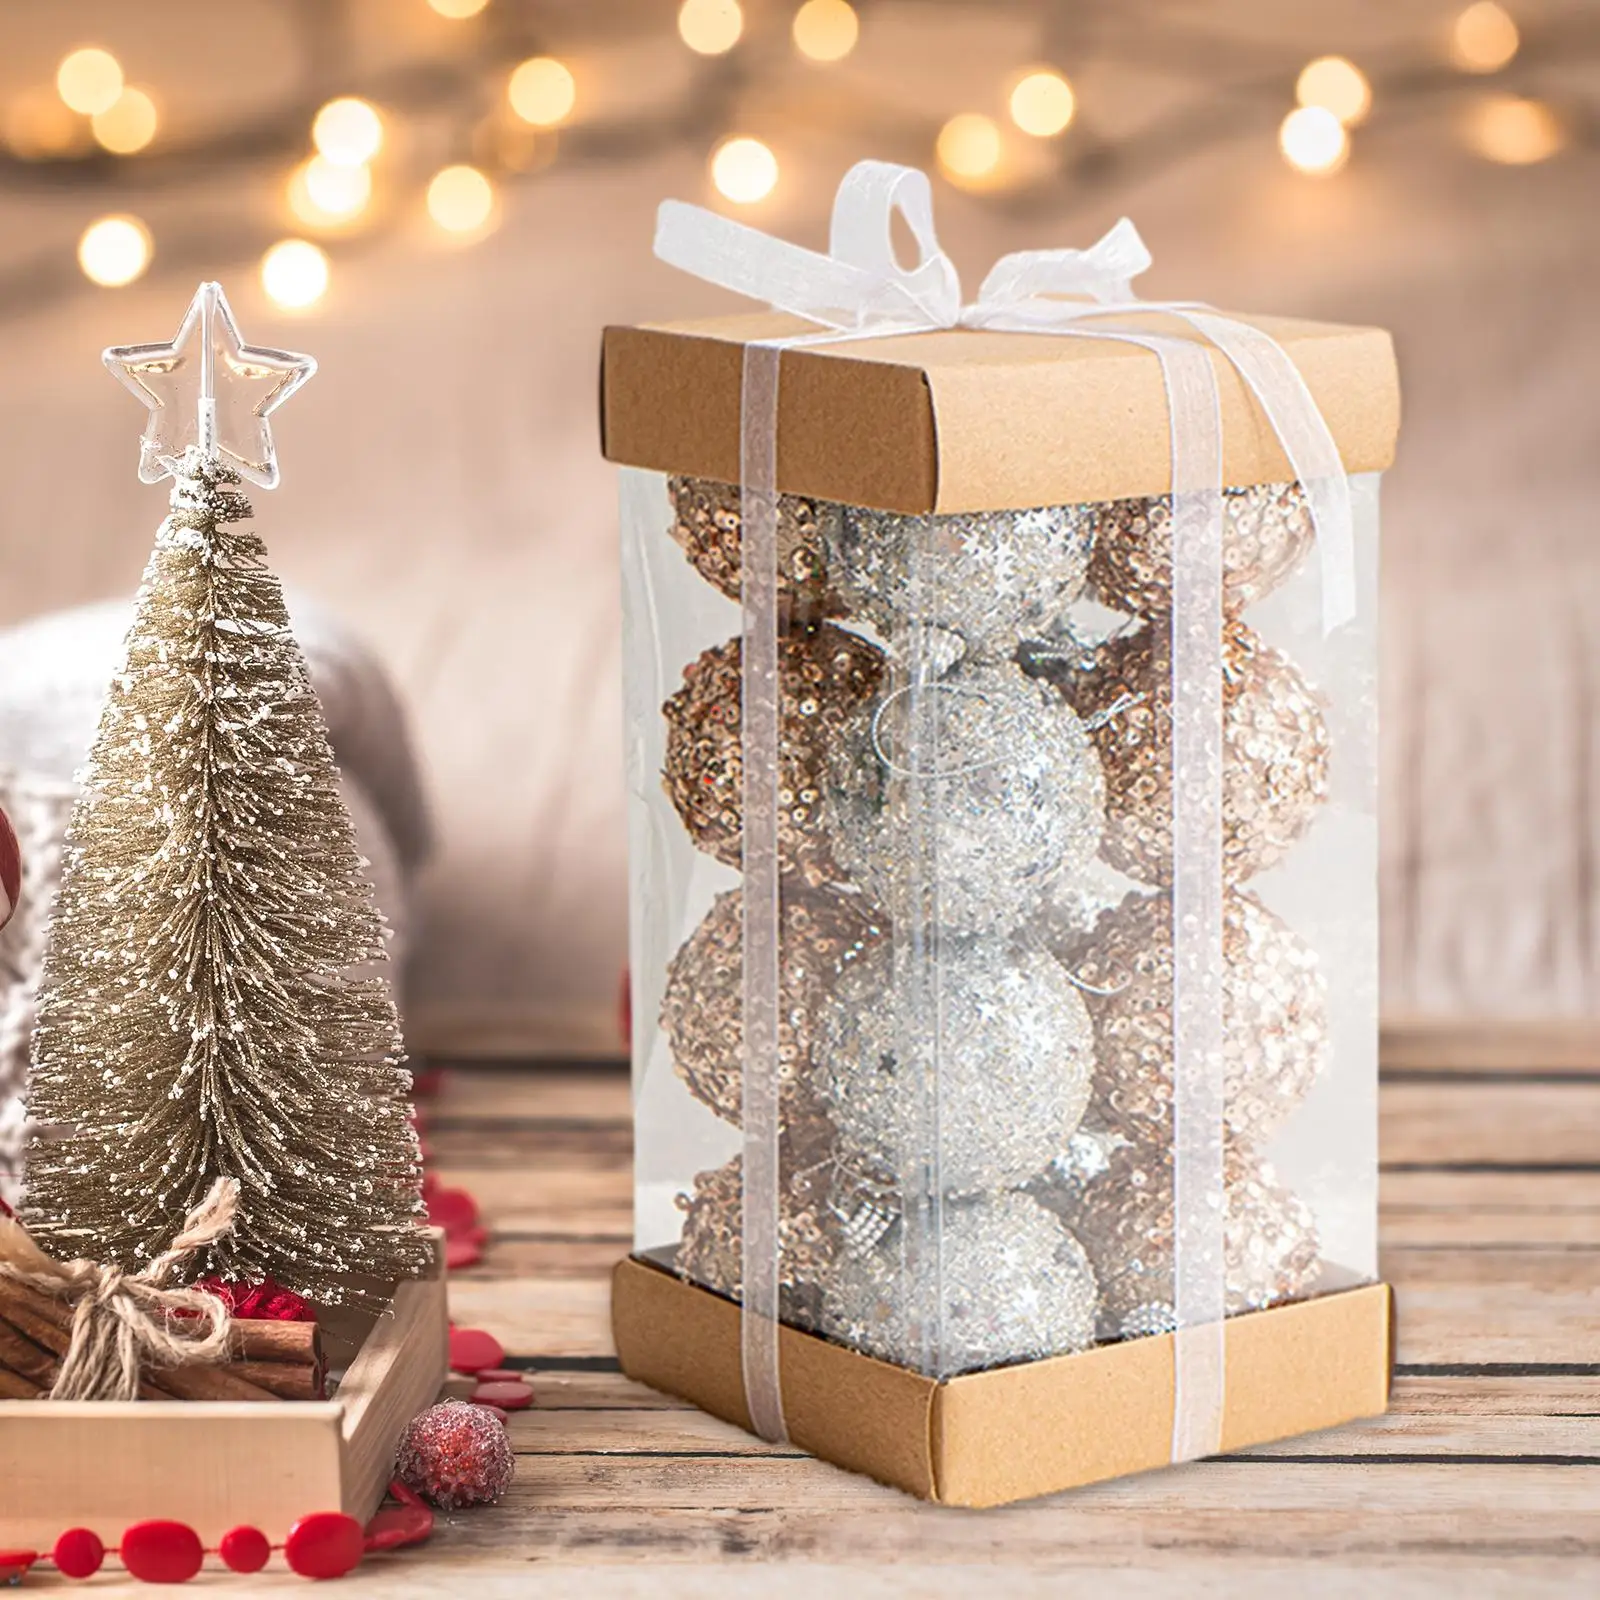 16 Pieces Christmas Ball Ornaments Decorative Xmas Balls Baubles Shatterproof for Birthday Wreath New Year Celebration Home